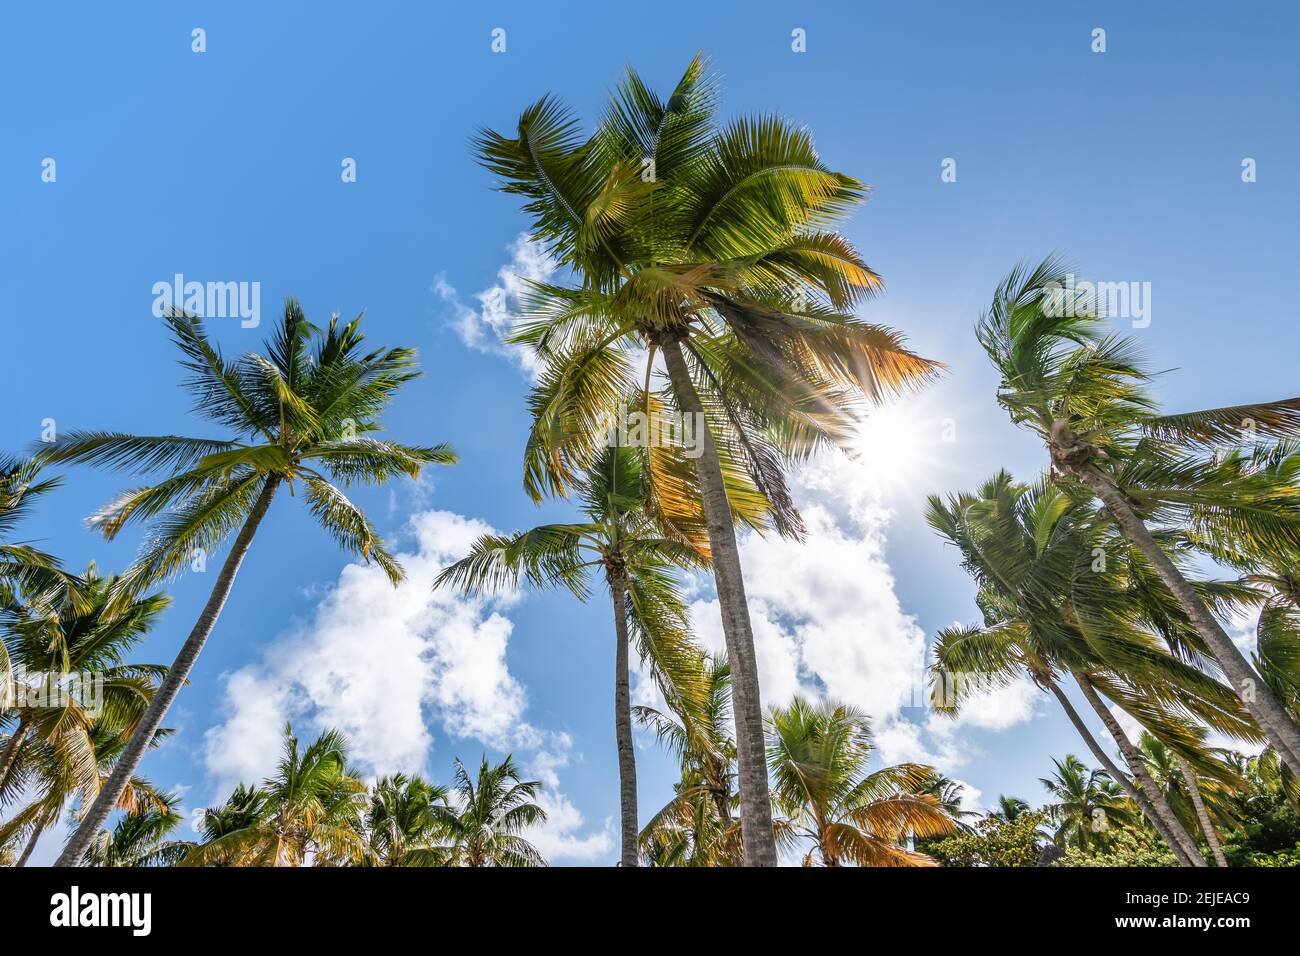 Tropical palm trees against blue sky. Stock Photo